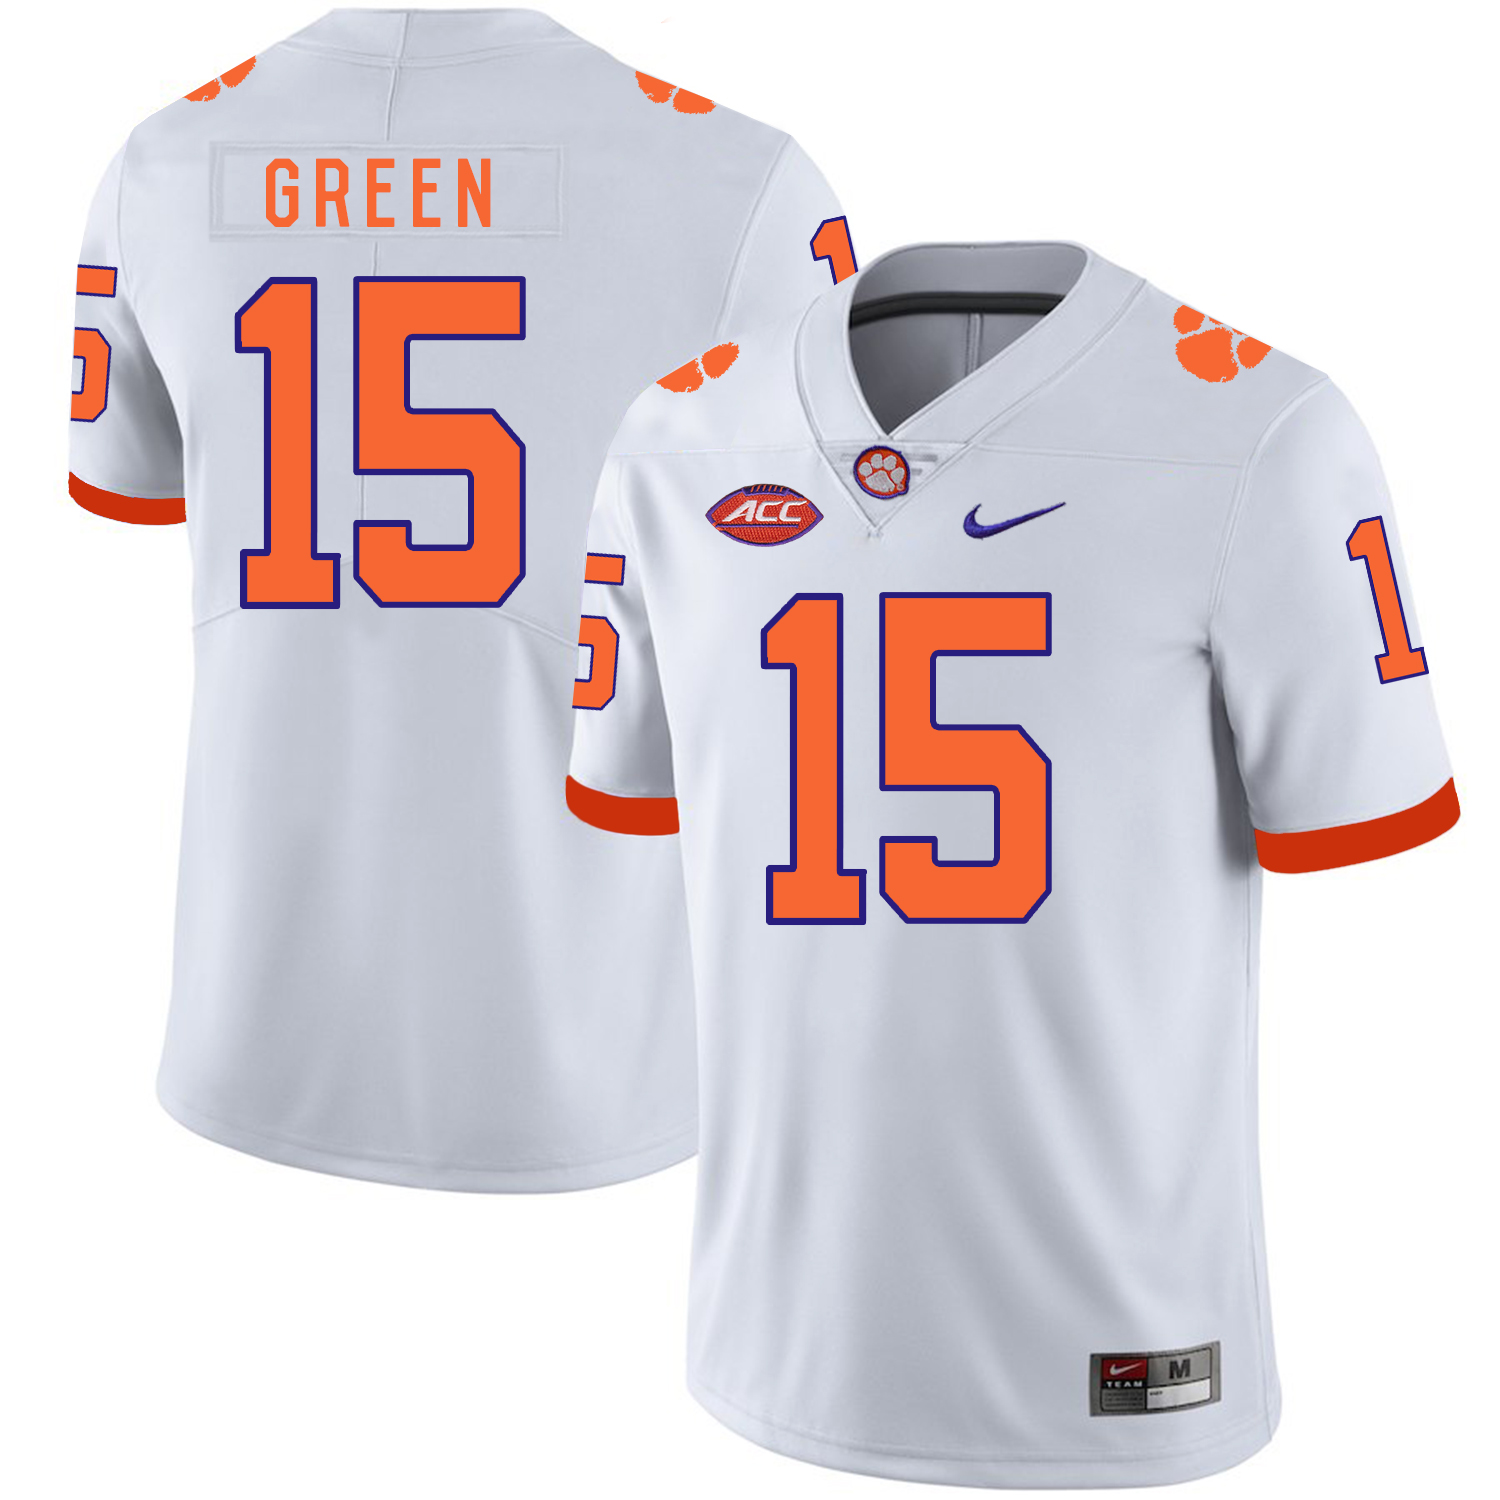 Clemson Tigers 15 T.J. Green White Nike College Football Jersey